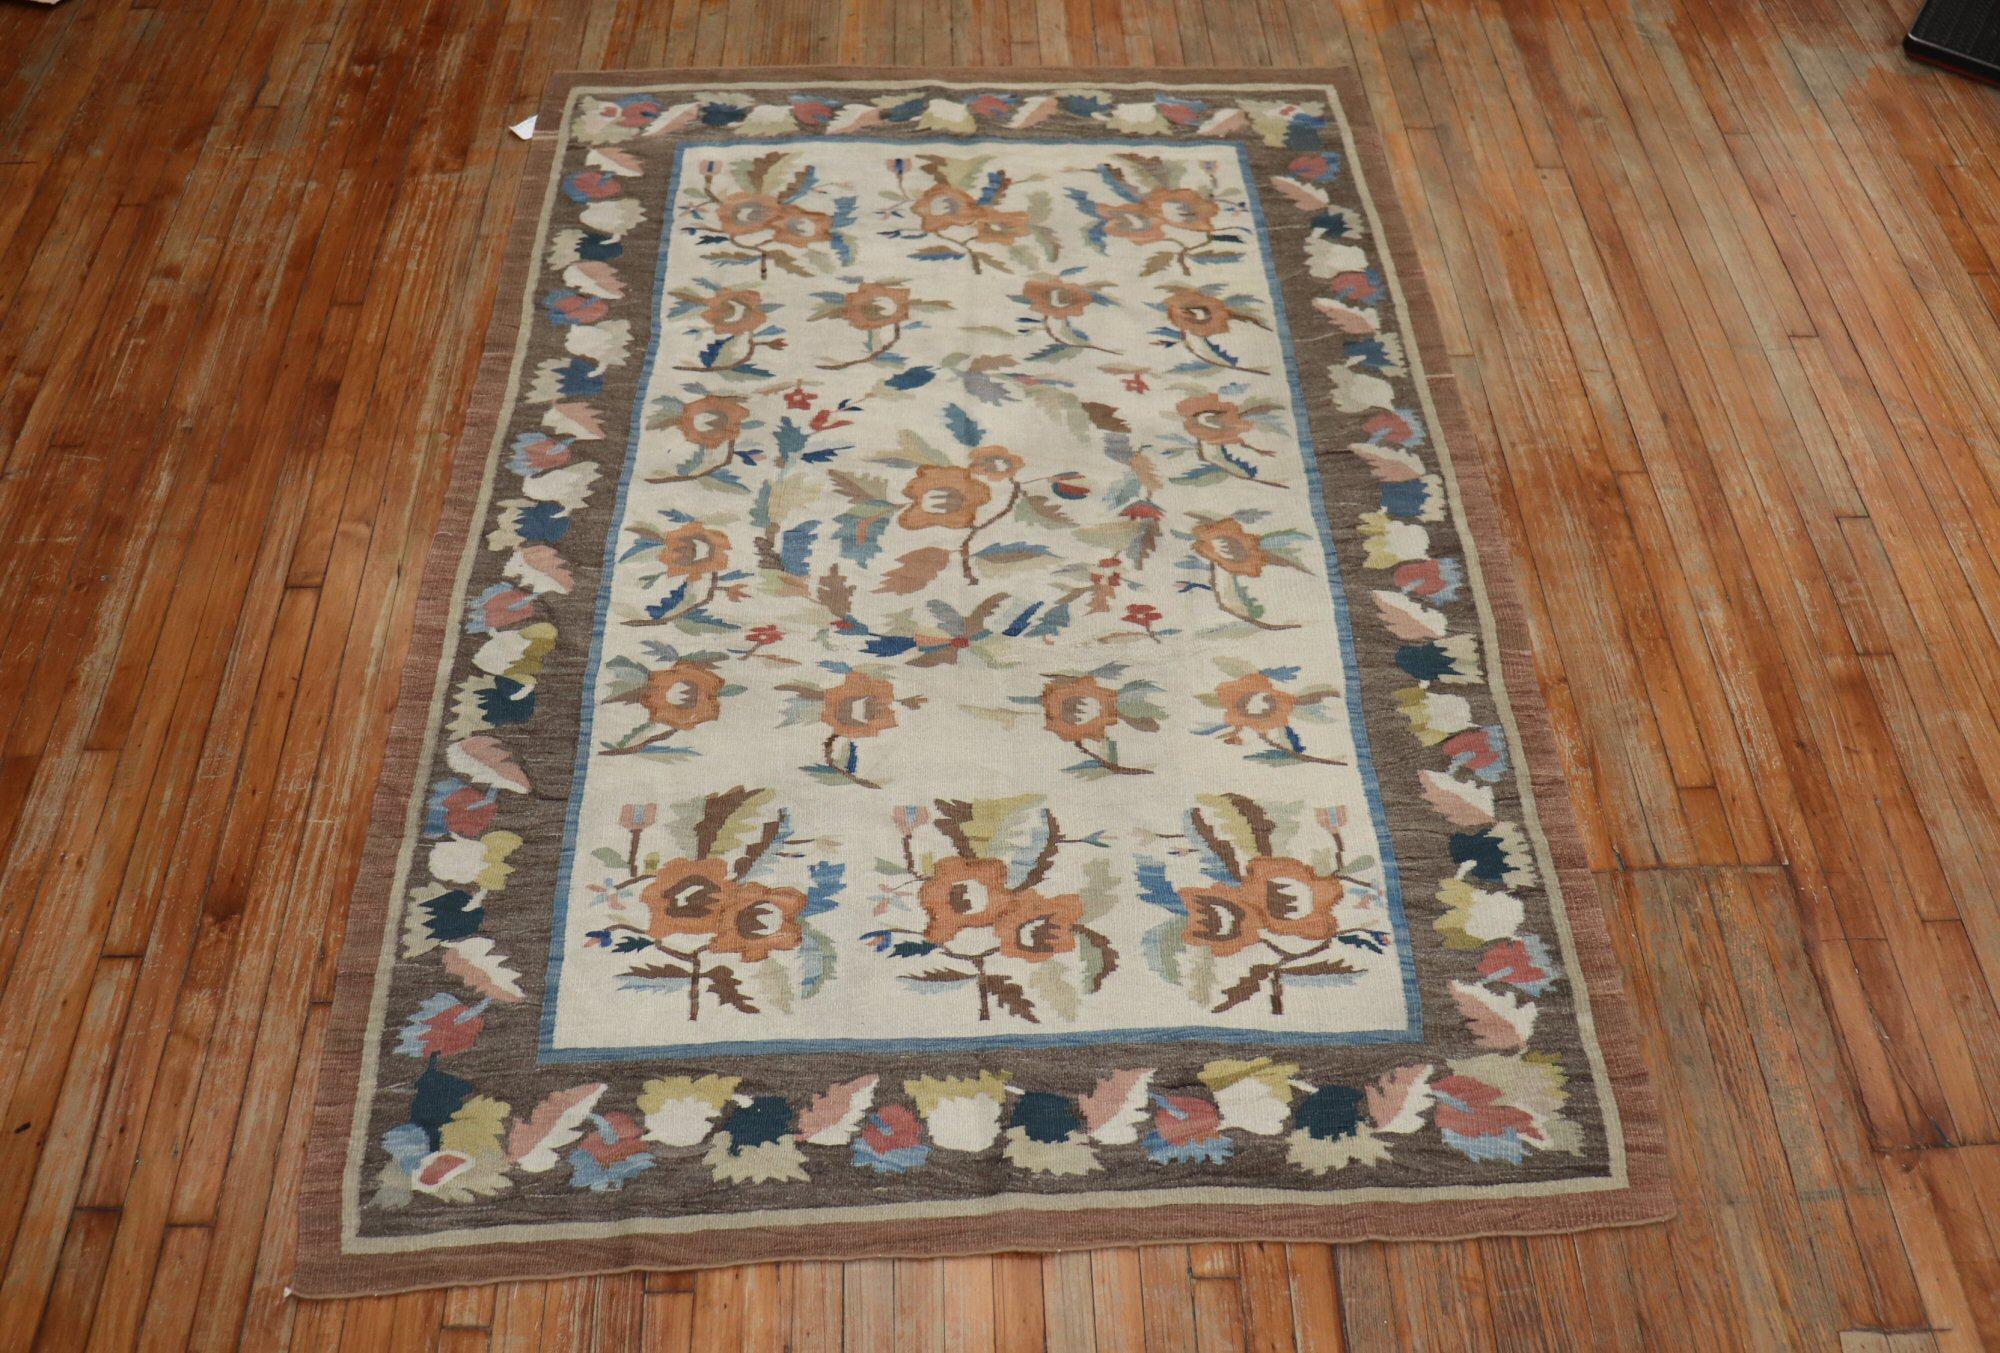 An early 20th century rustic color Bessarabian Kilim with a large scale floral design on an ivory field. The border and the field have floral motif s that intertwin.

Measures: 5'5” x 7'11”

Bessarabian Kilims in both pile and tapestry weaving